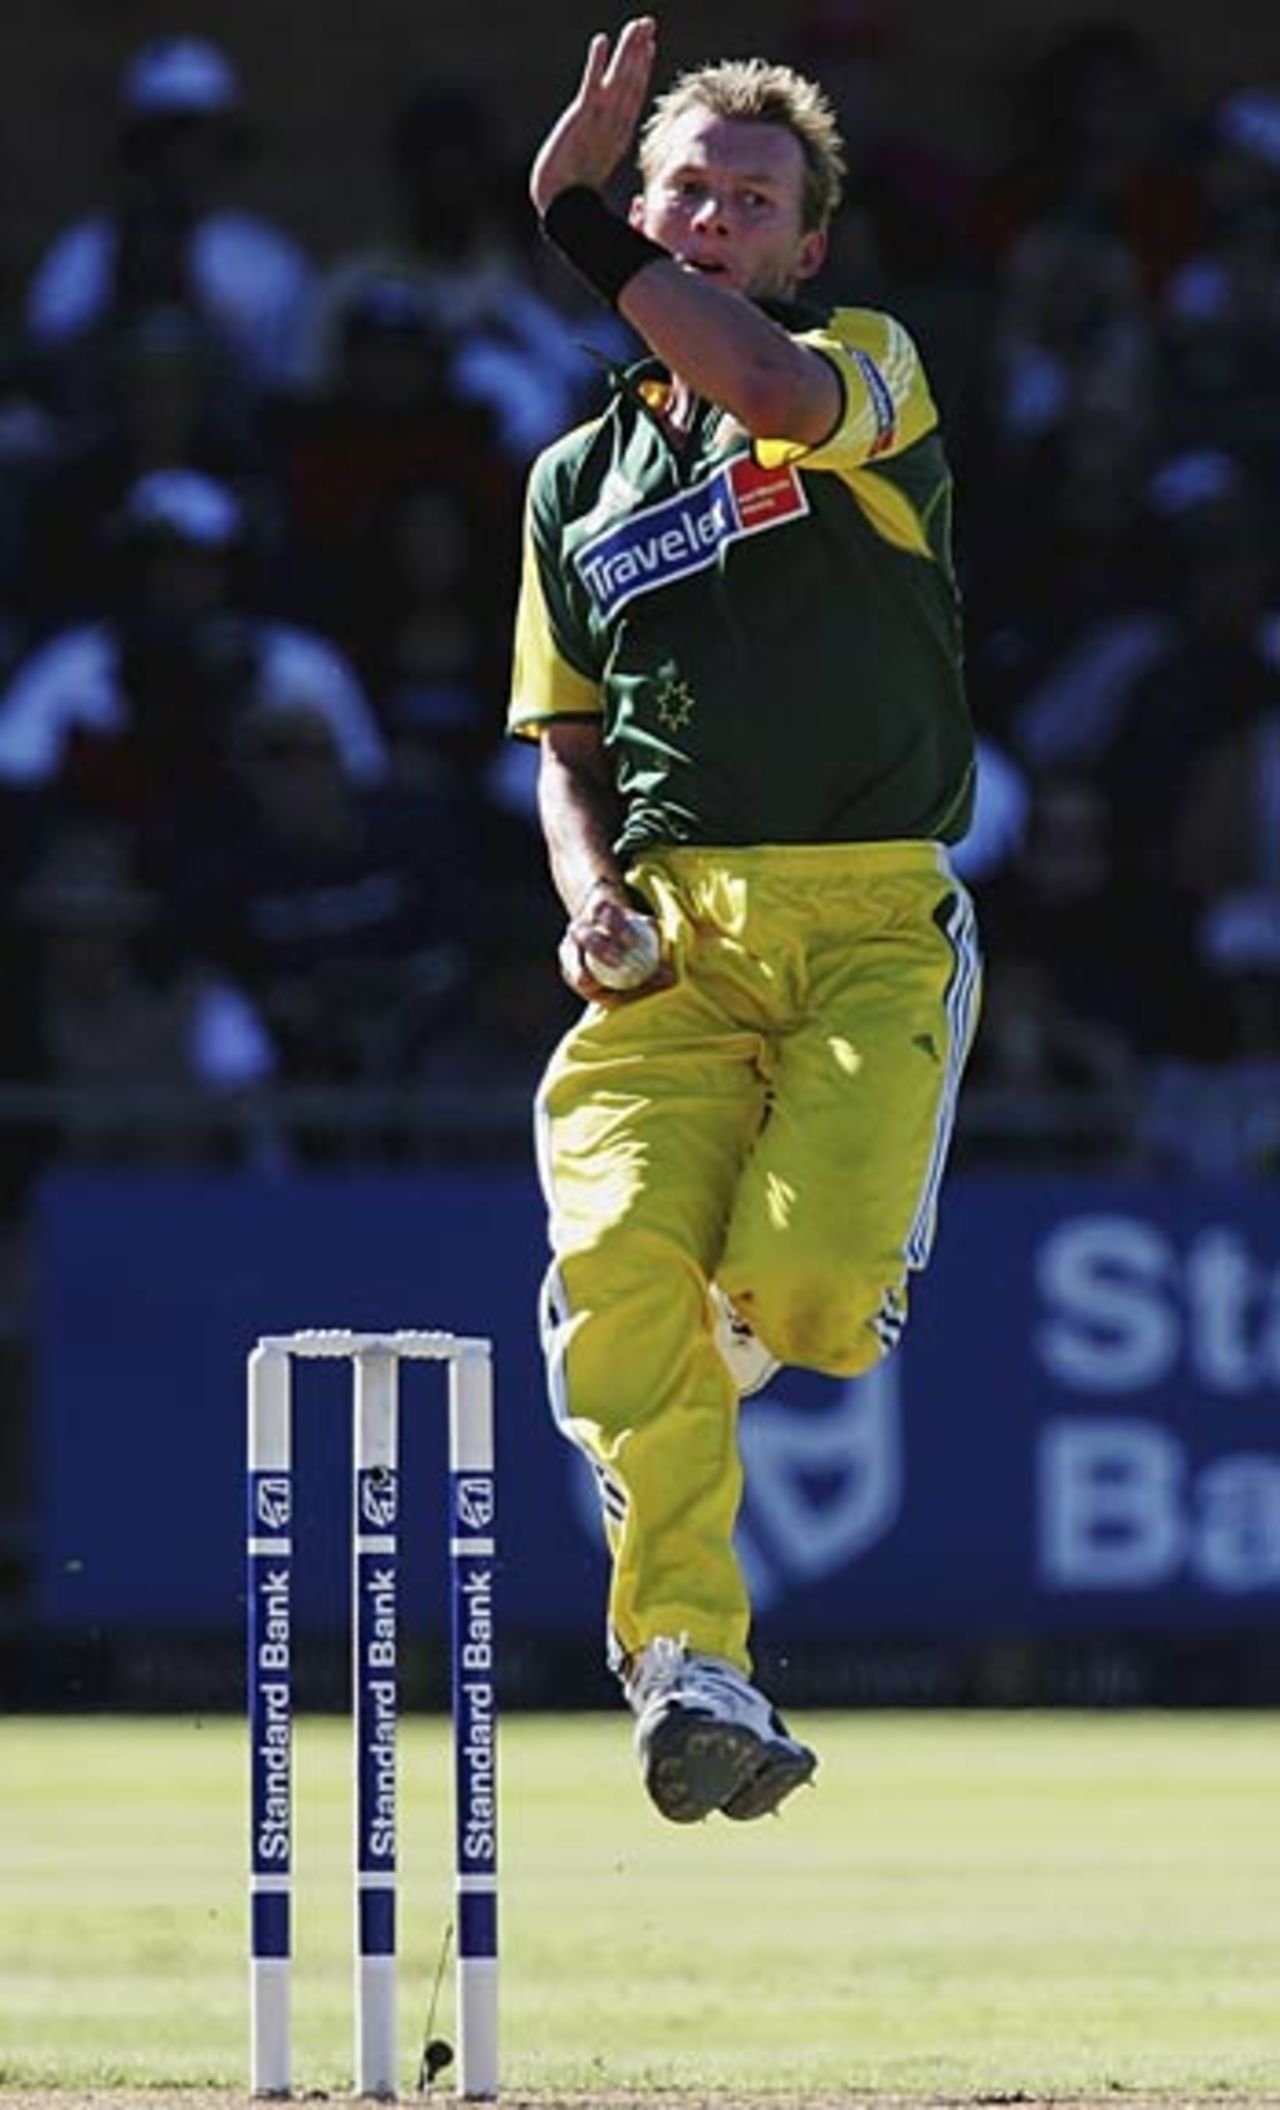 Brett Lee claimed four vital wickets as Australia brought themselves back into the series with a 24-run win, South Africa v Australia, 3rd ODI, Port Elizabeth, March 5, 2006